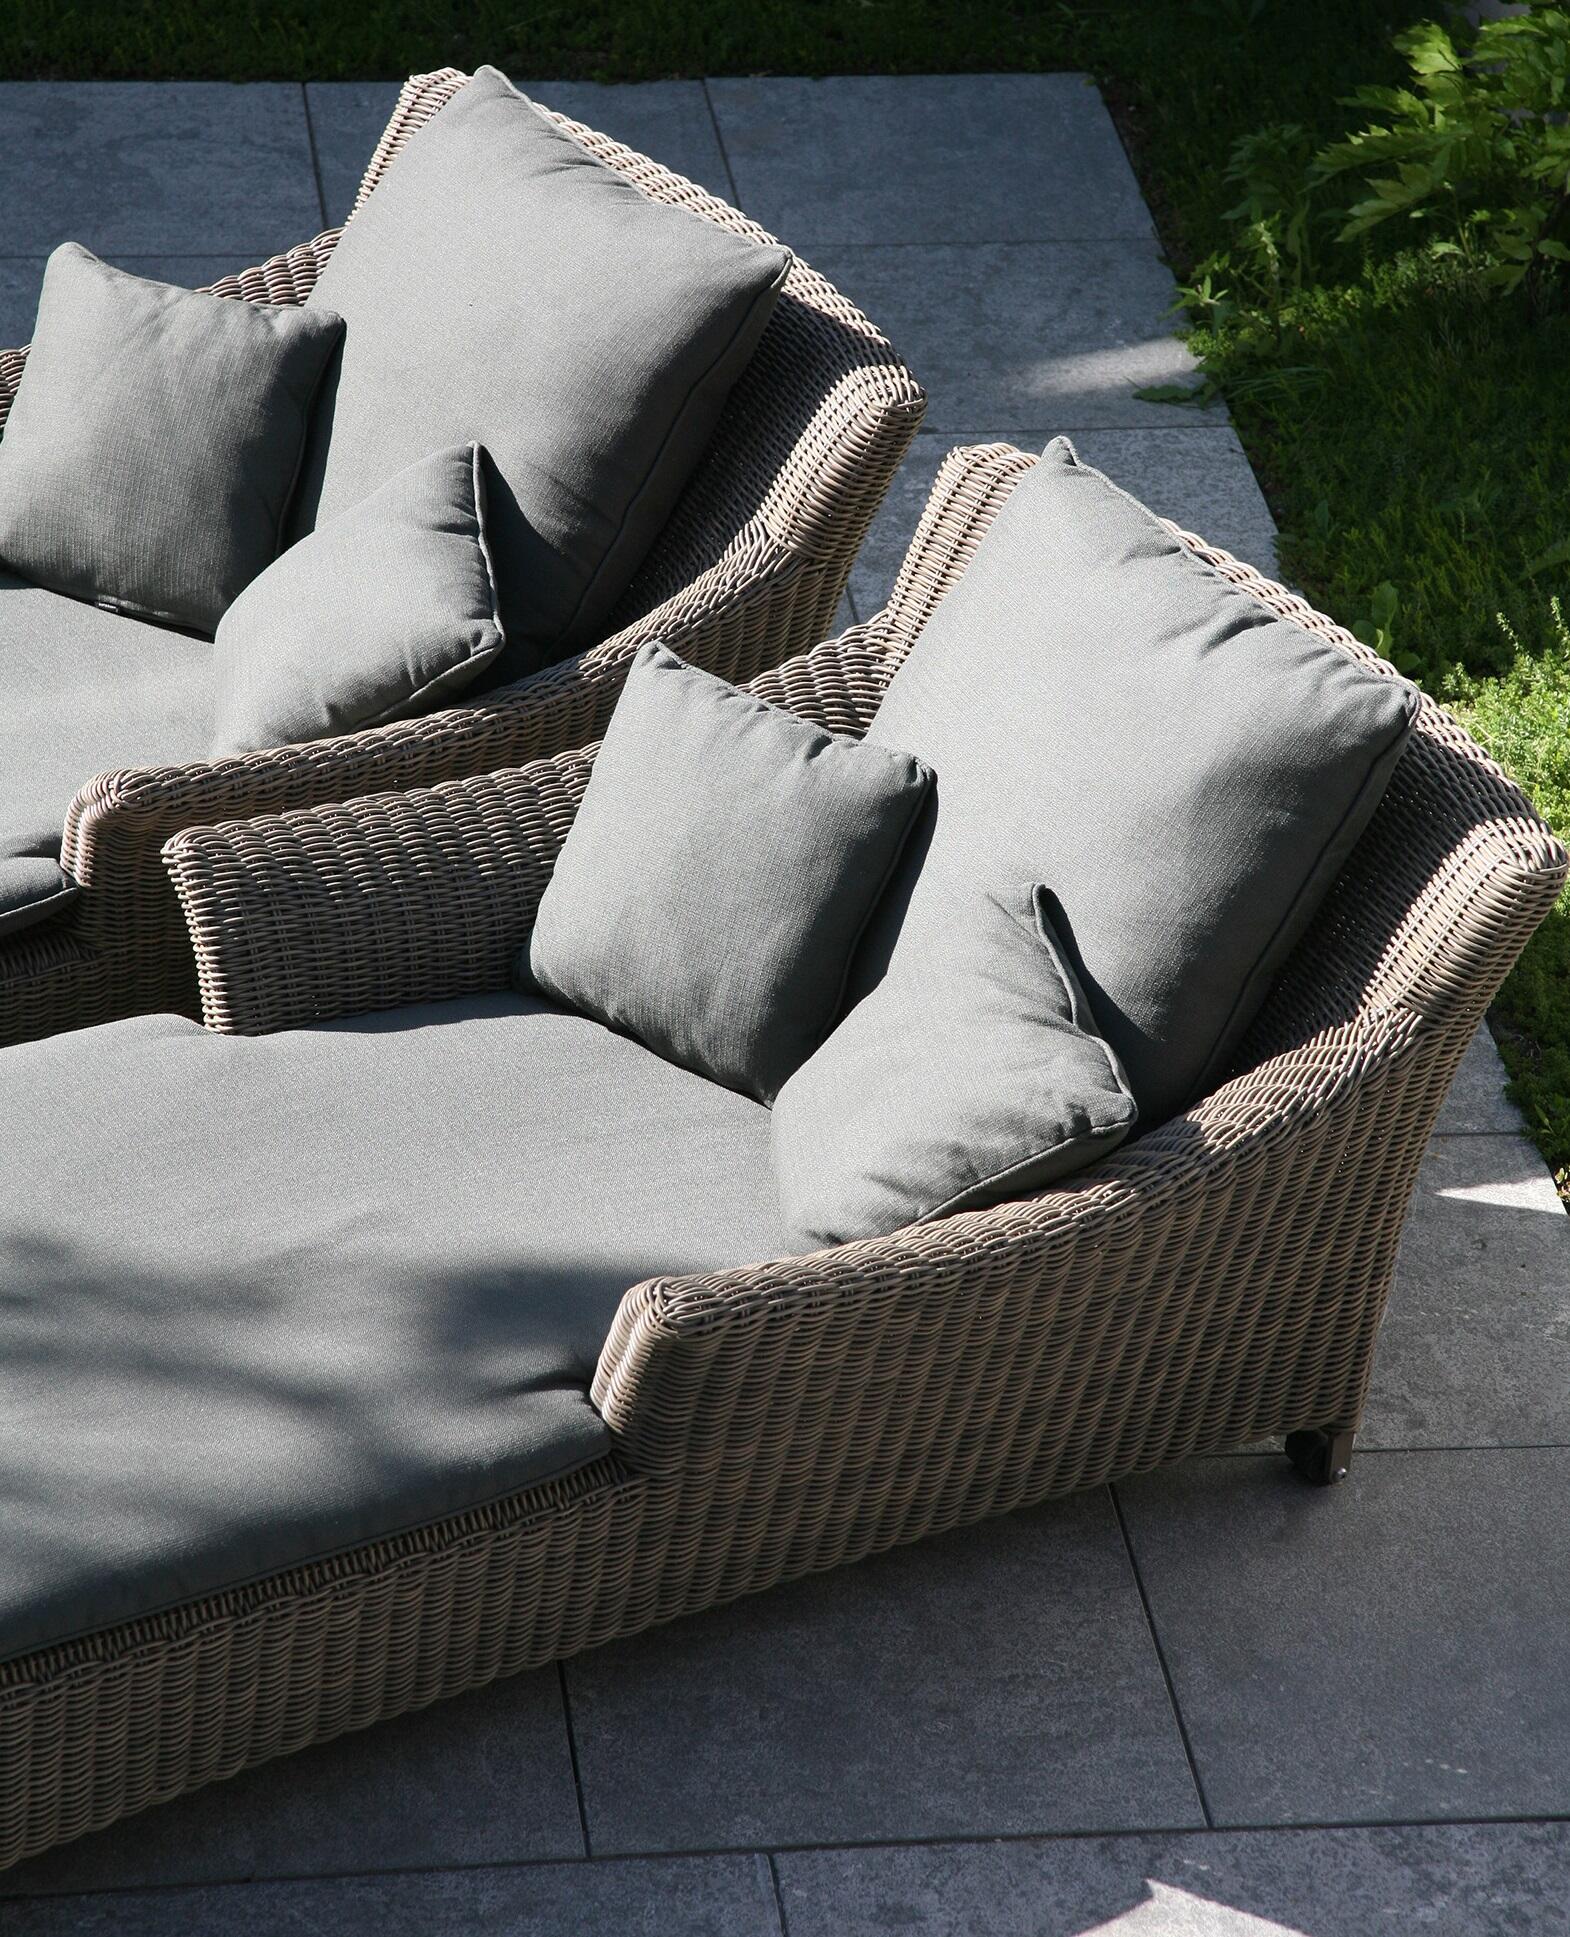 weatherproof wicker rattan single garden daybed or sun lounger with grey cushioons